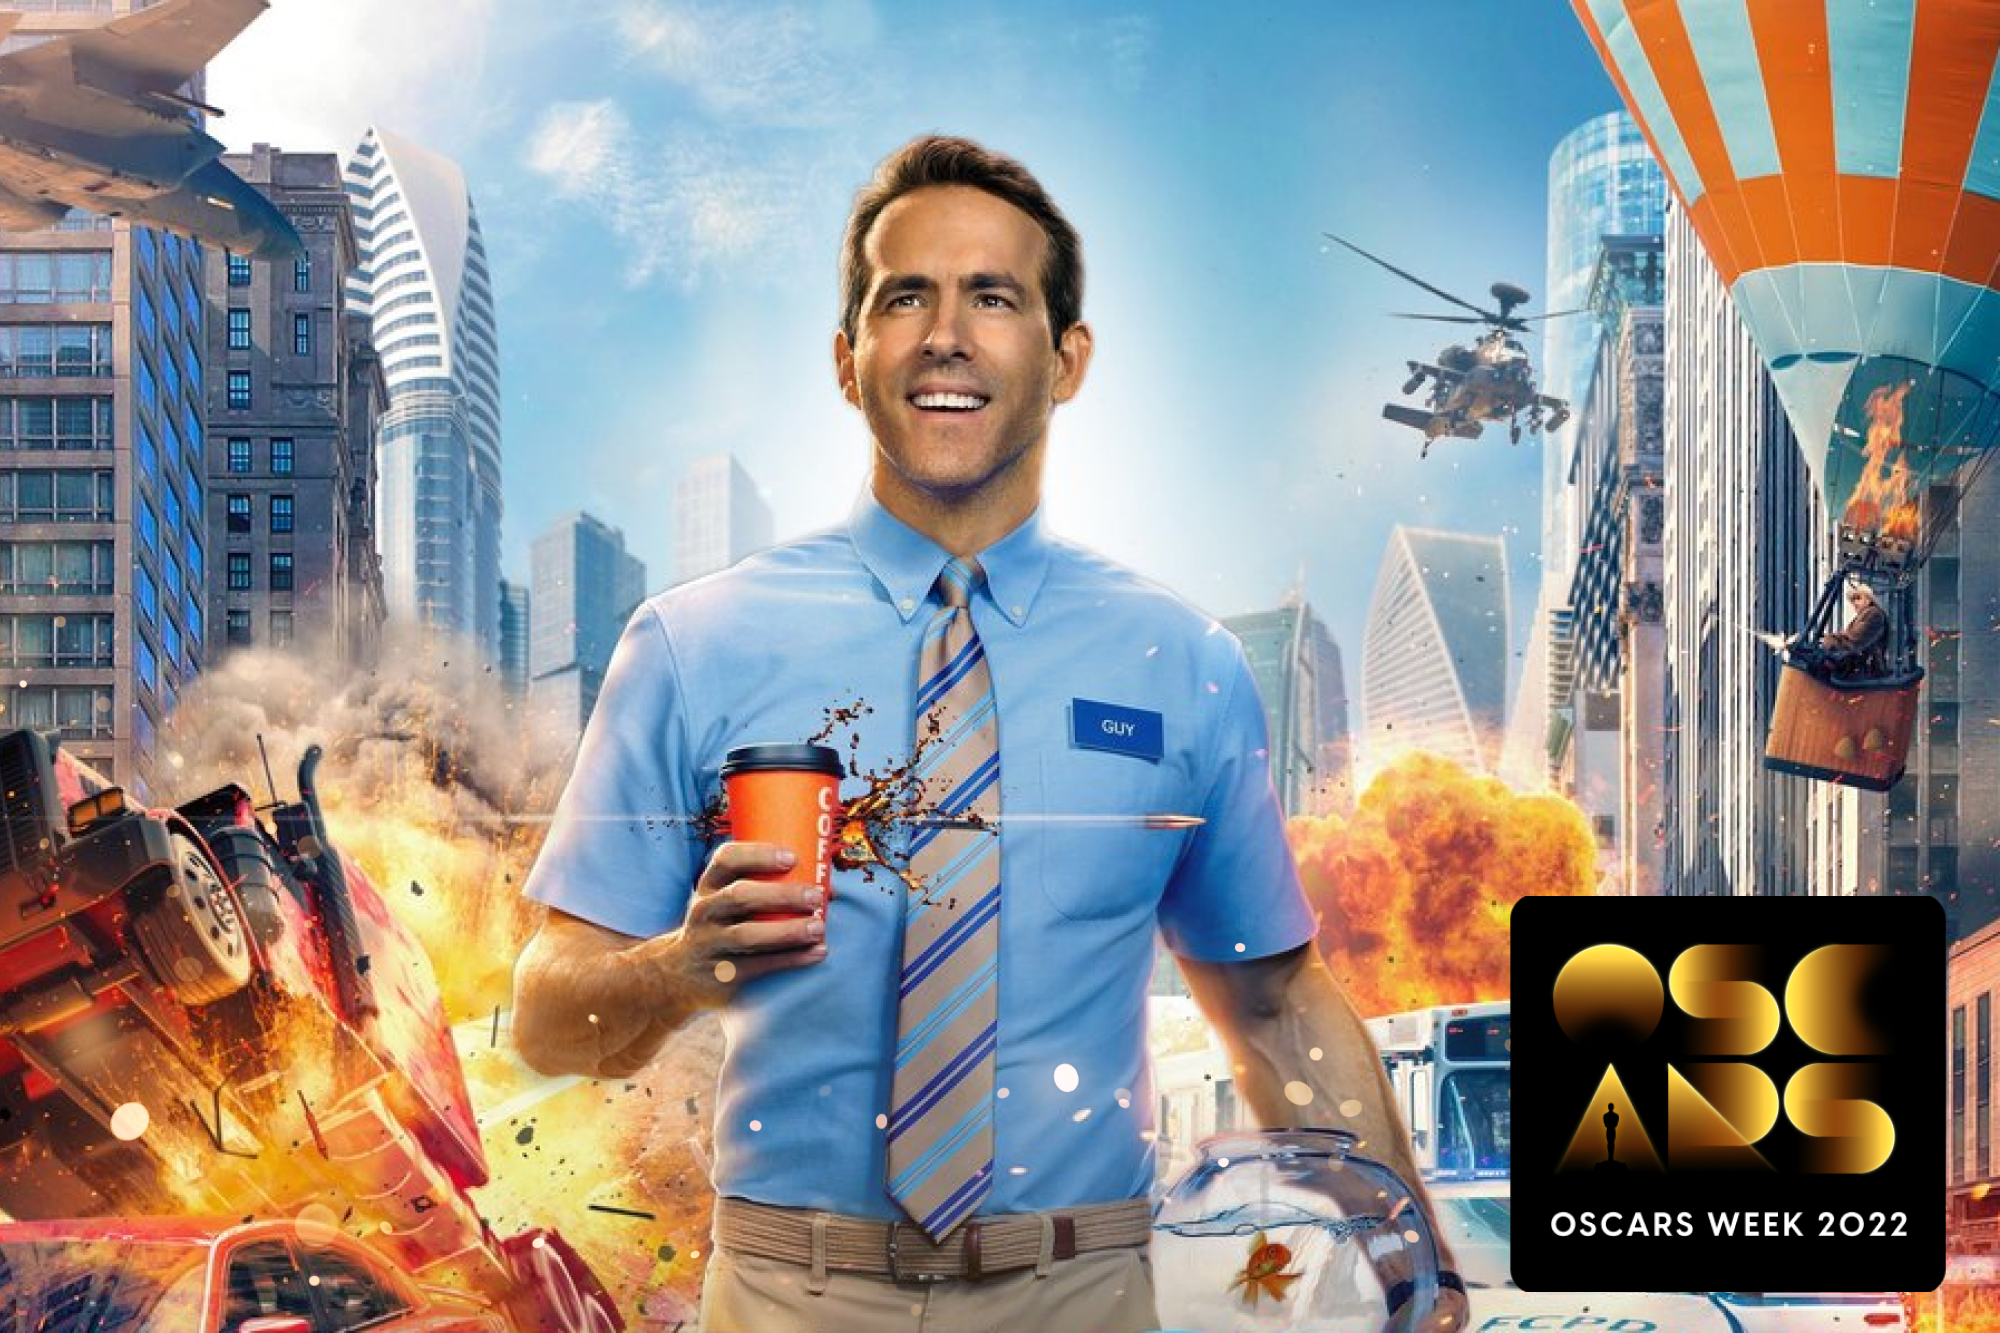 Free Guy review roundup: Ryan Reynolds' video game movie is 'outrageously  entertaining, uplifting tale